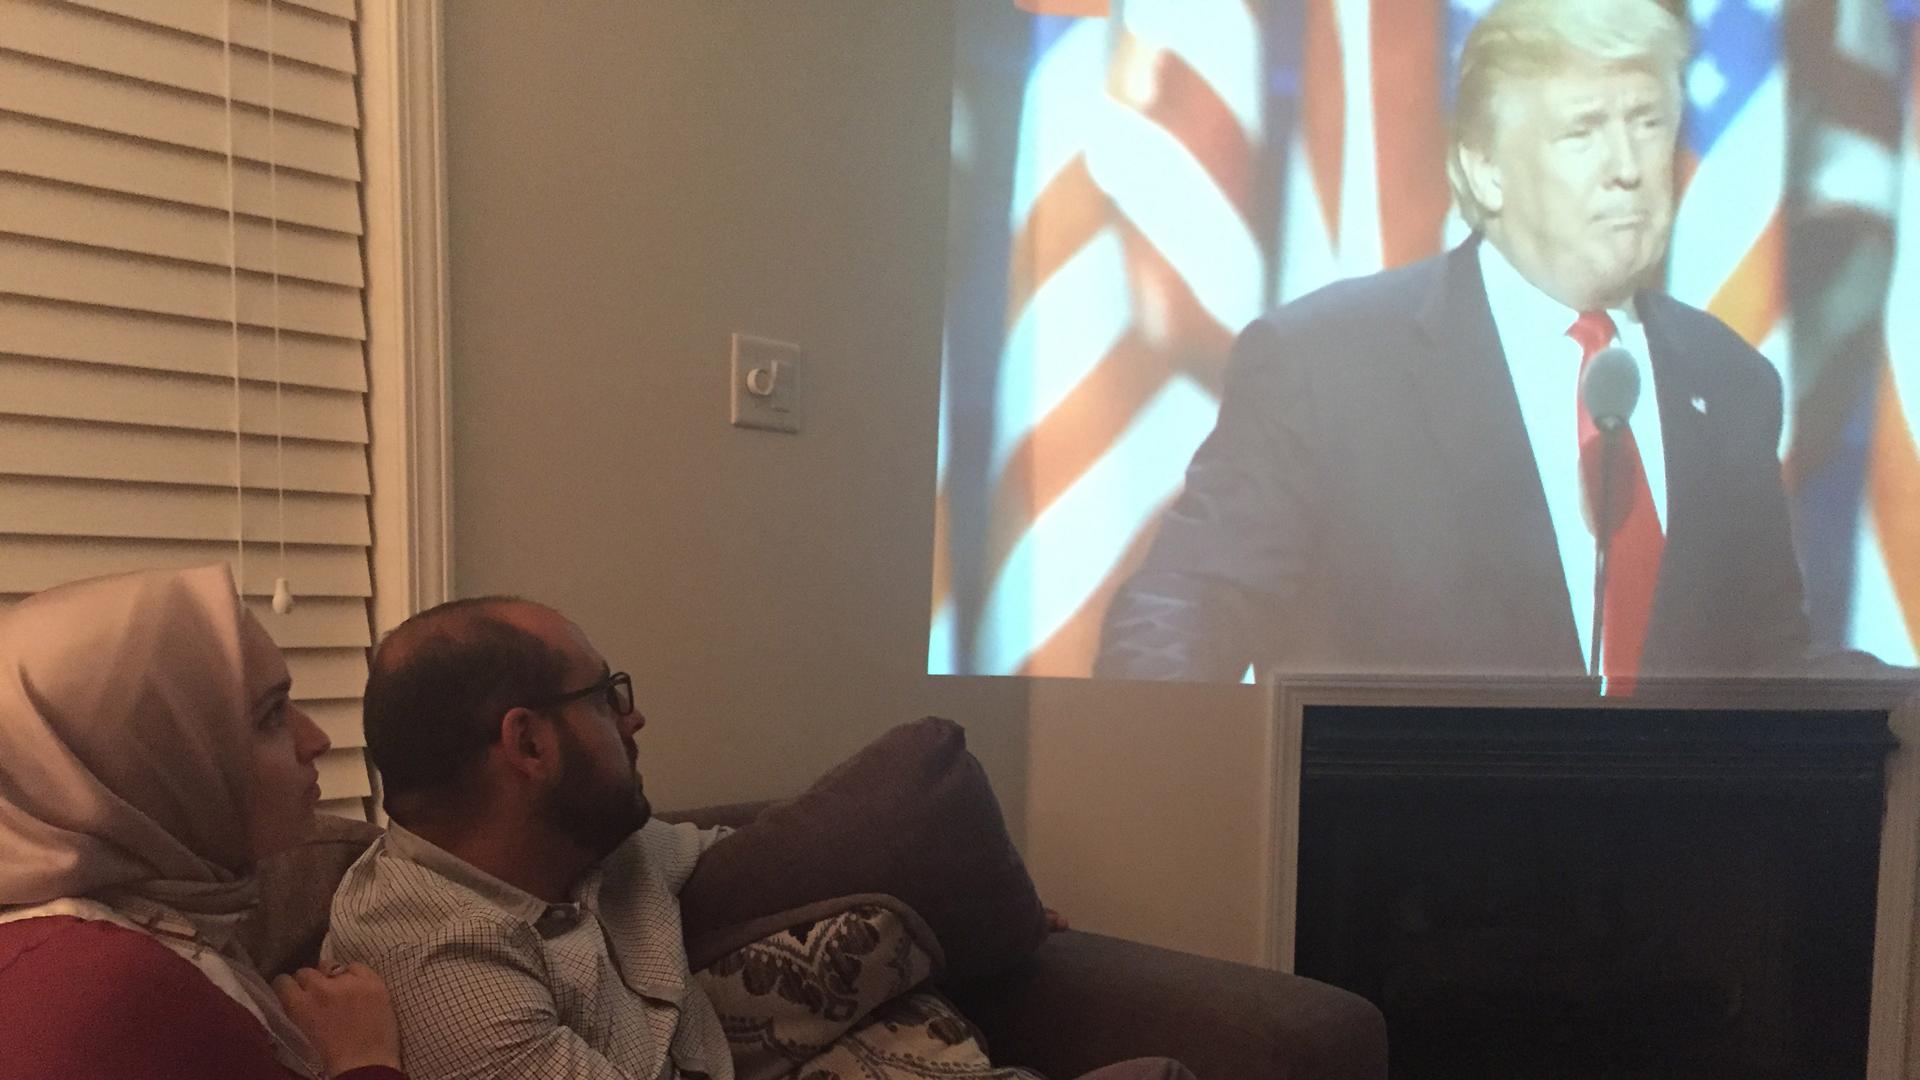 Marwah Maasarani and her husband Omar Awad watching Donald Trump's RNC speech in their New Jersey livingroom on Thursday. 